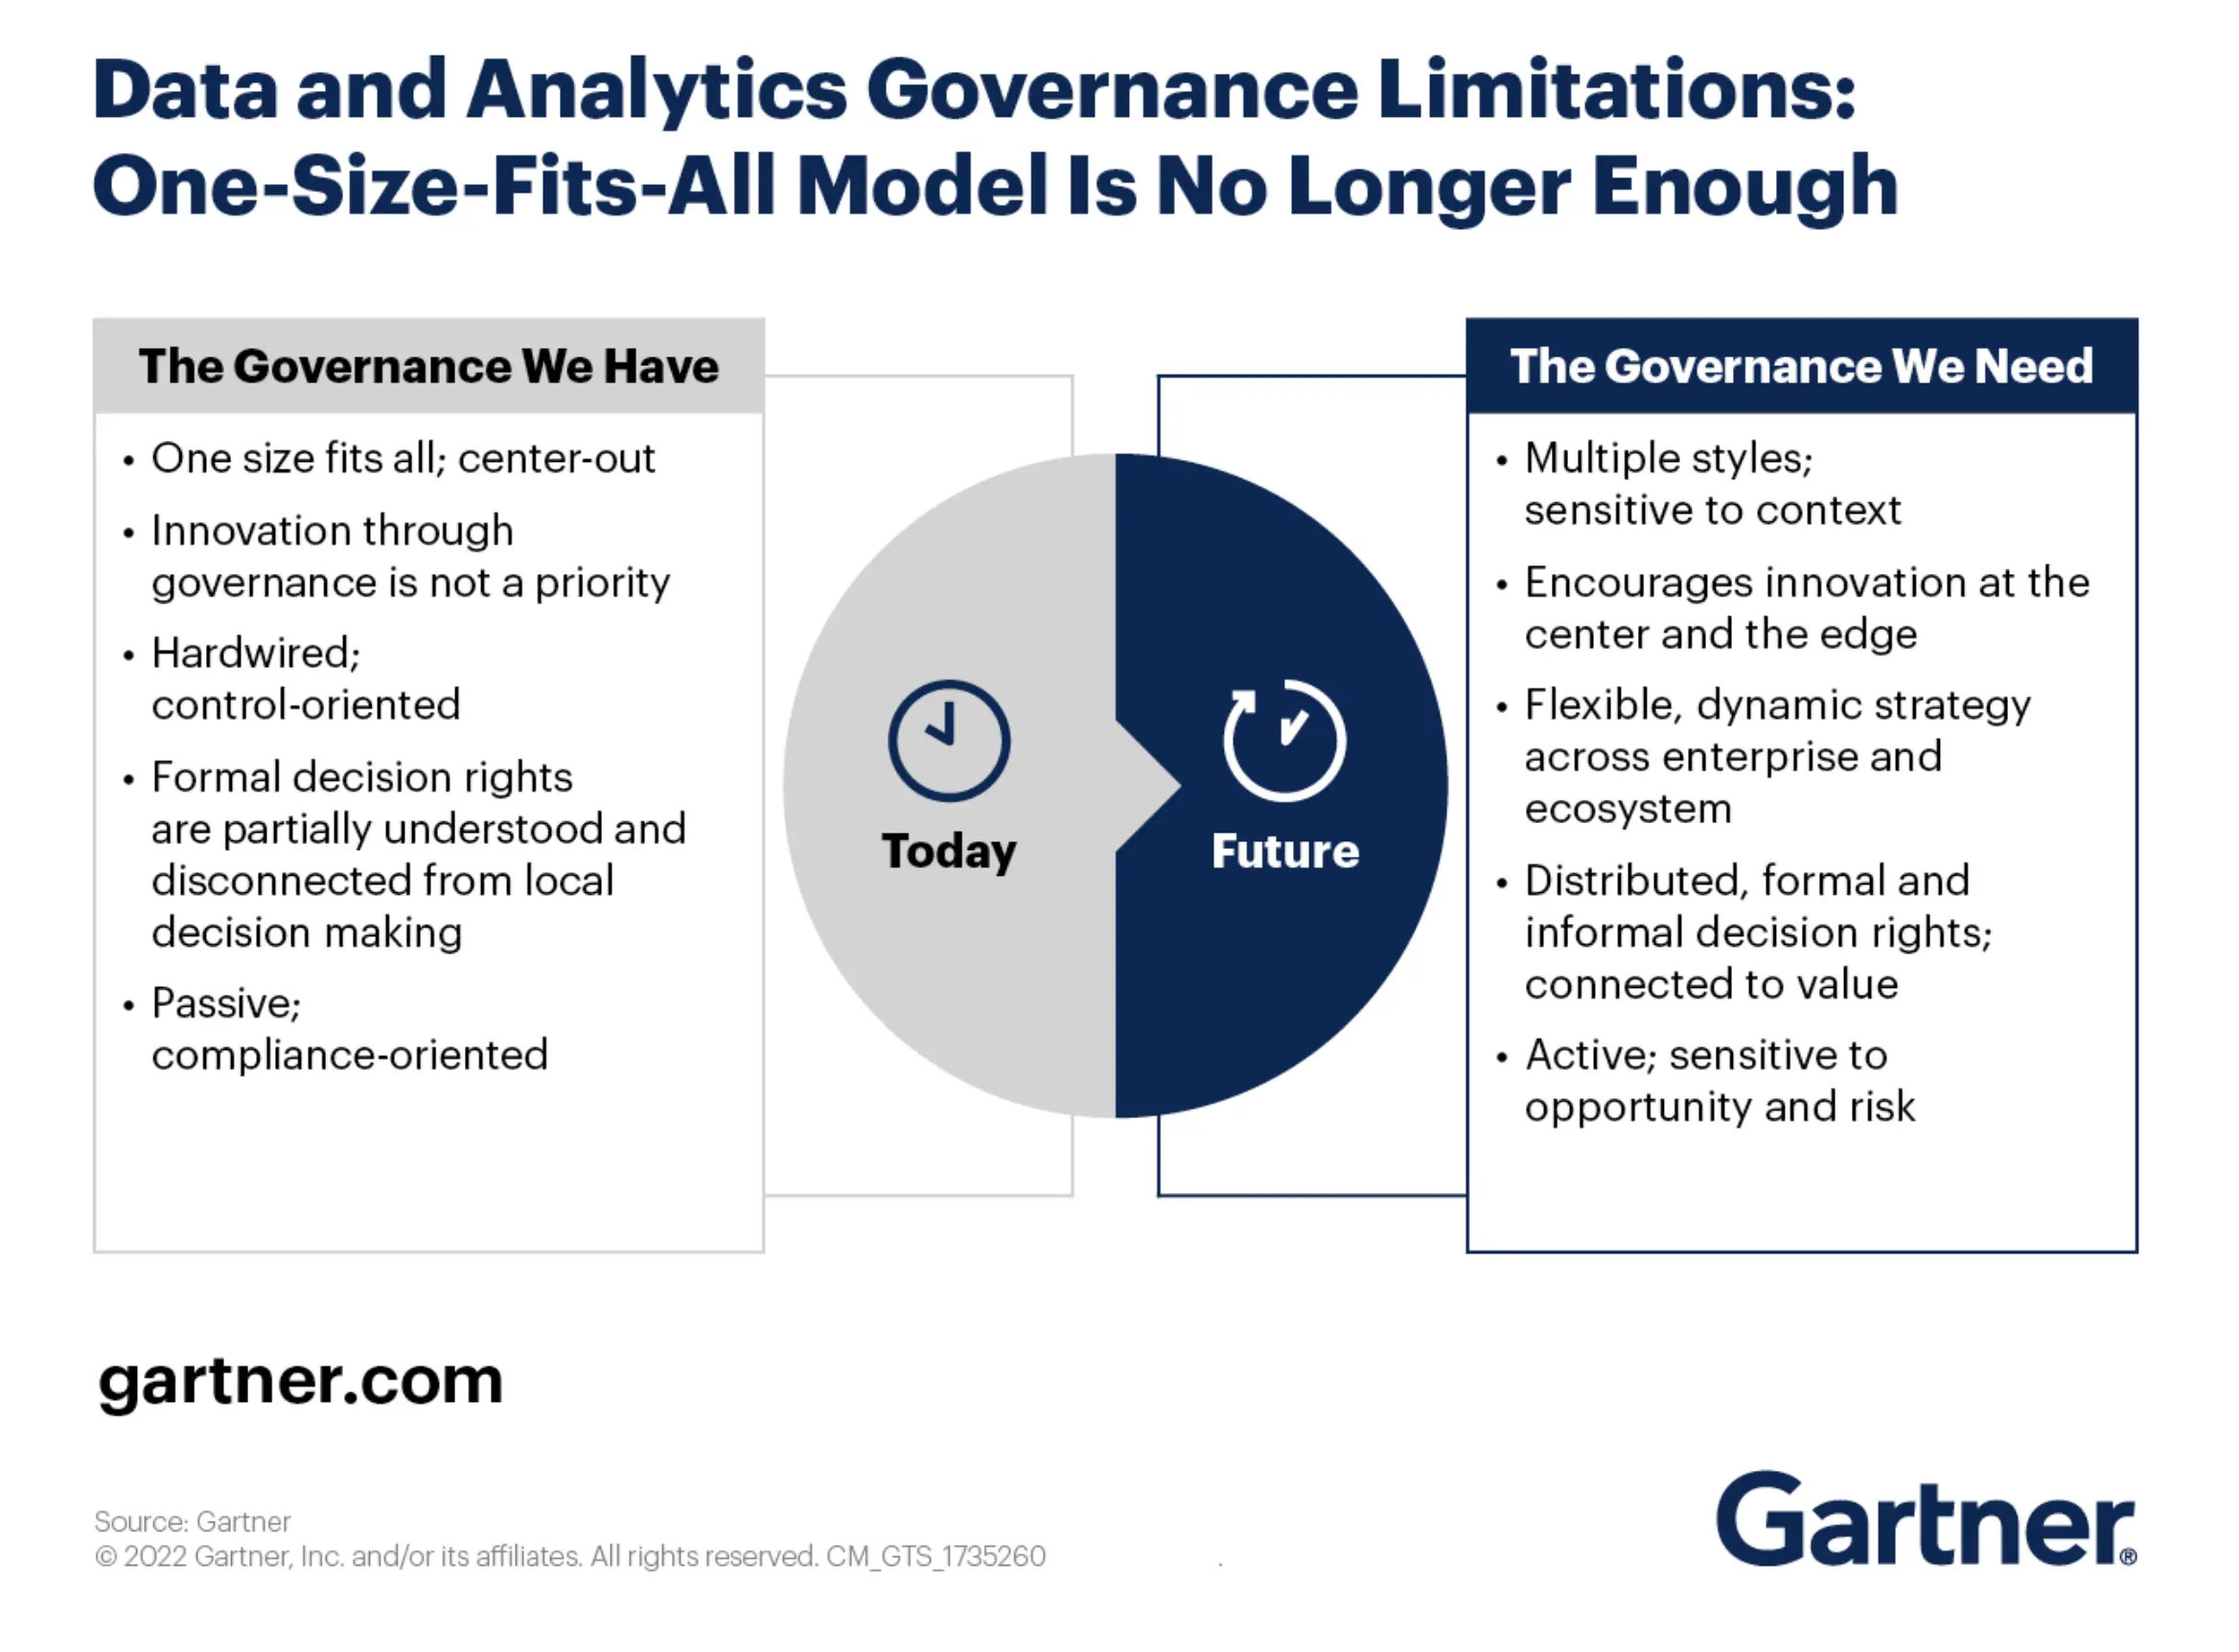 Modern data stack requires a paradigm shift in thinking about data governance. 